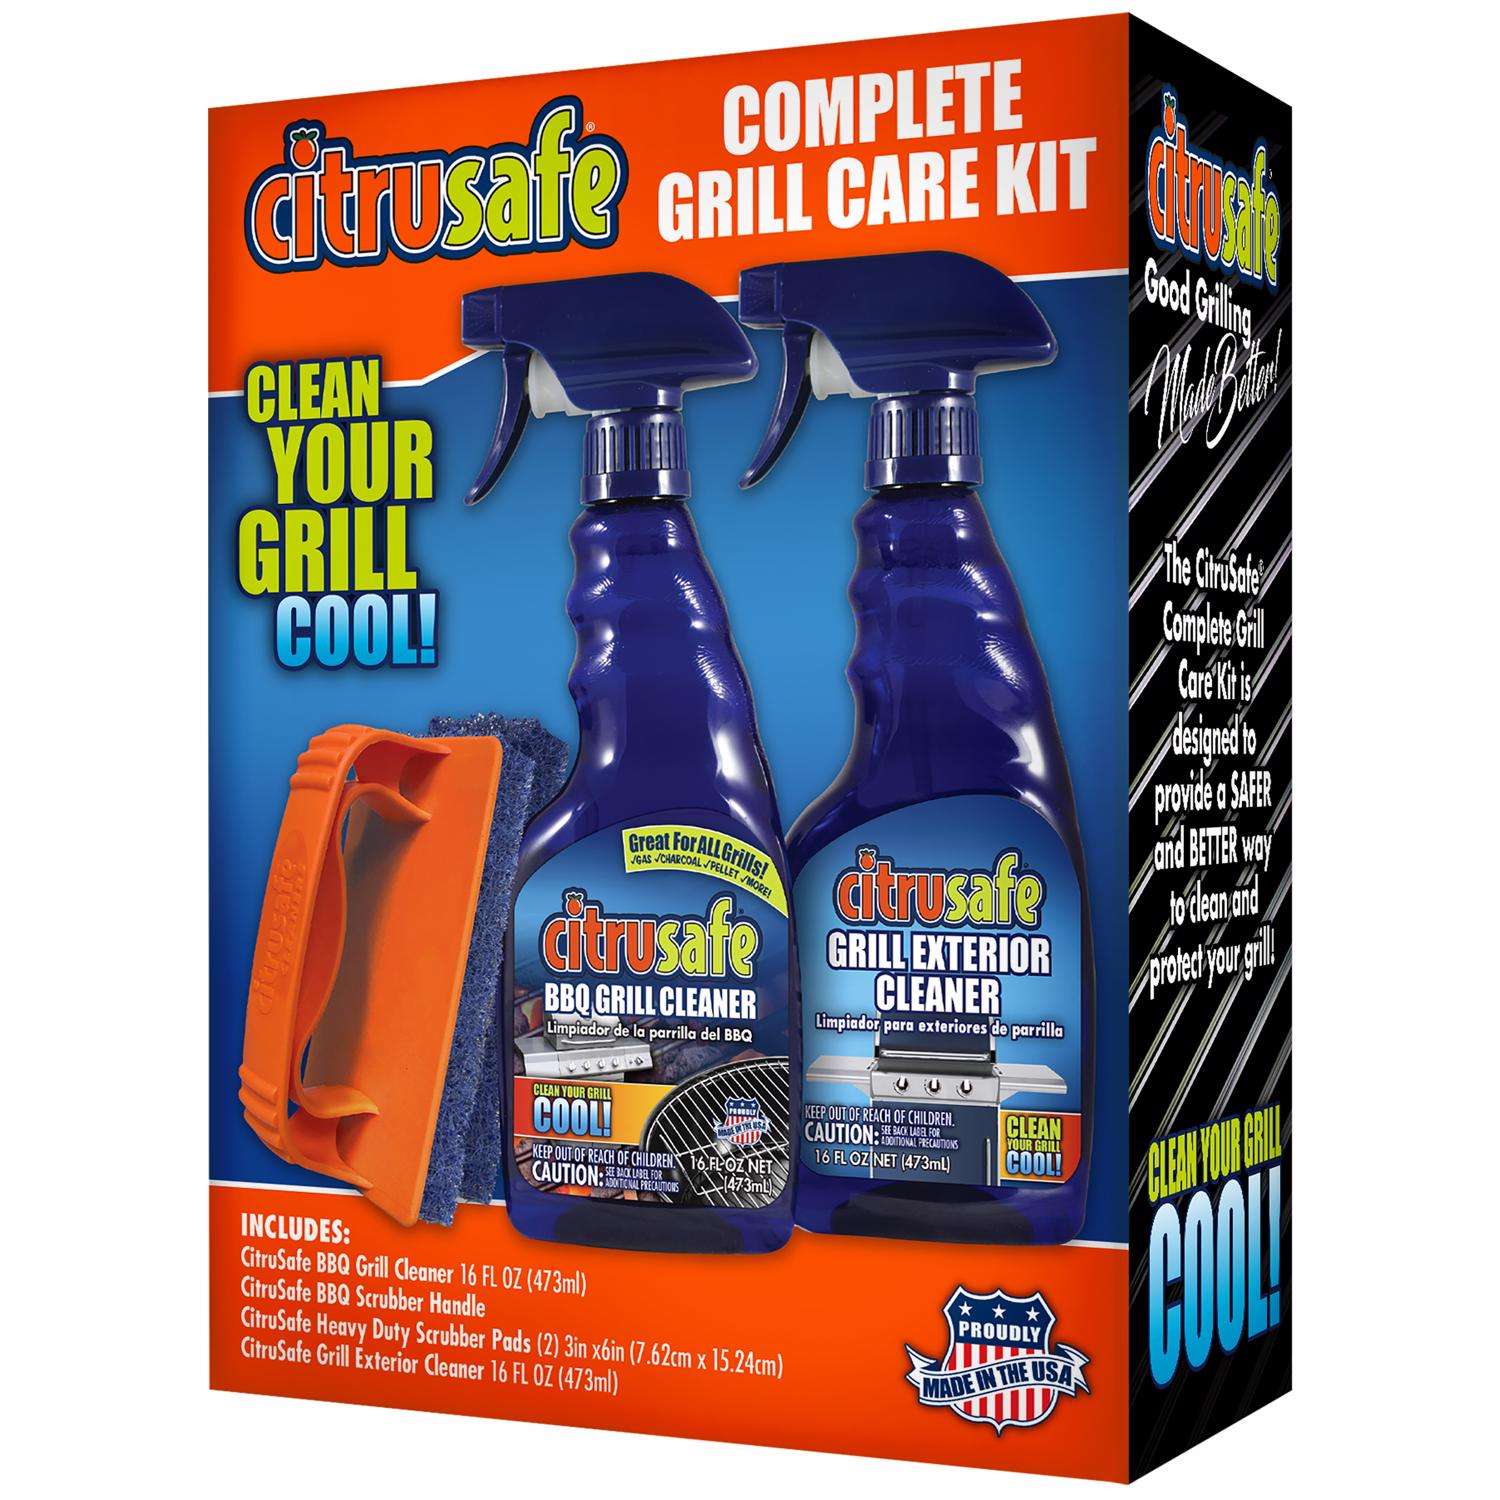 How to Clean Your Grill Grates, Grilling out this weekend? CitruSafe is  the safe, effective way to keep your grill clean!, By CitruSafe Grill  Cleaners